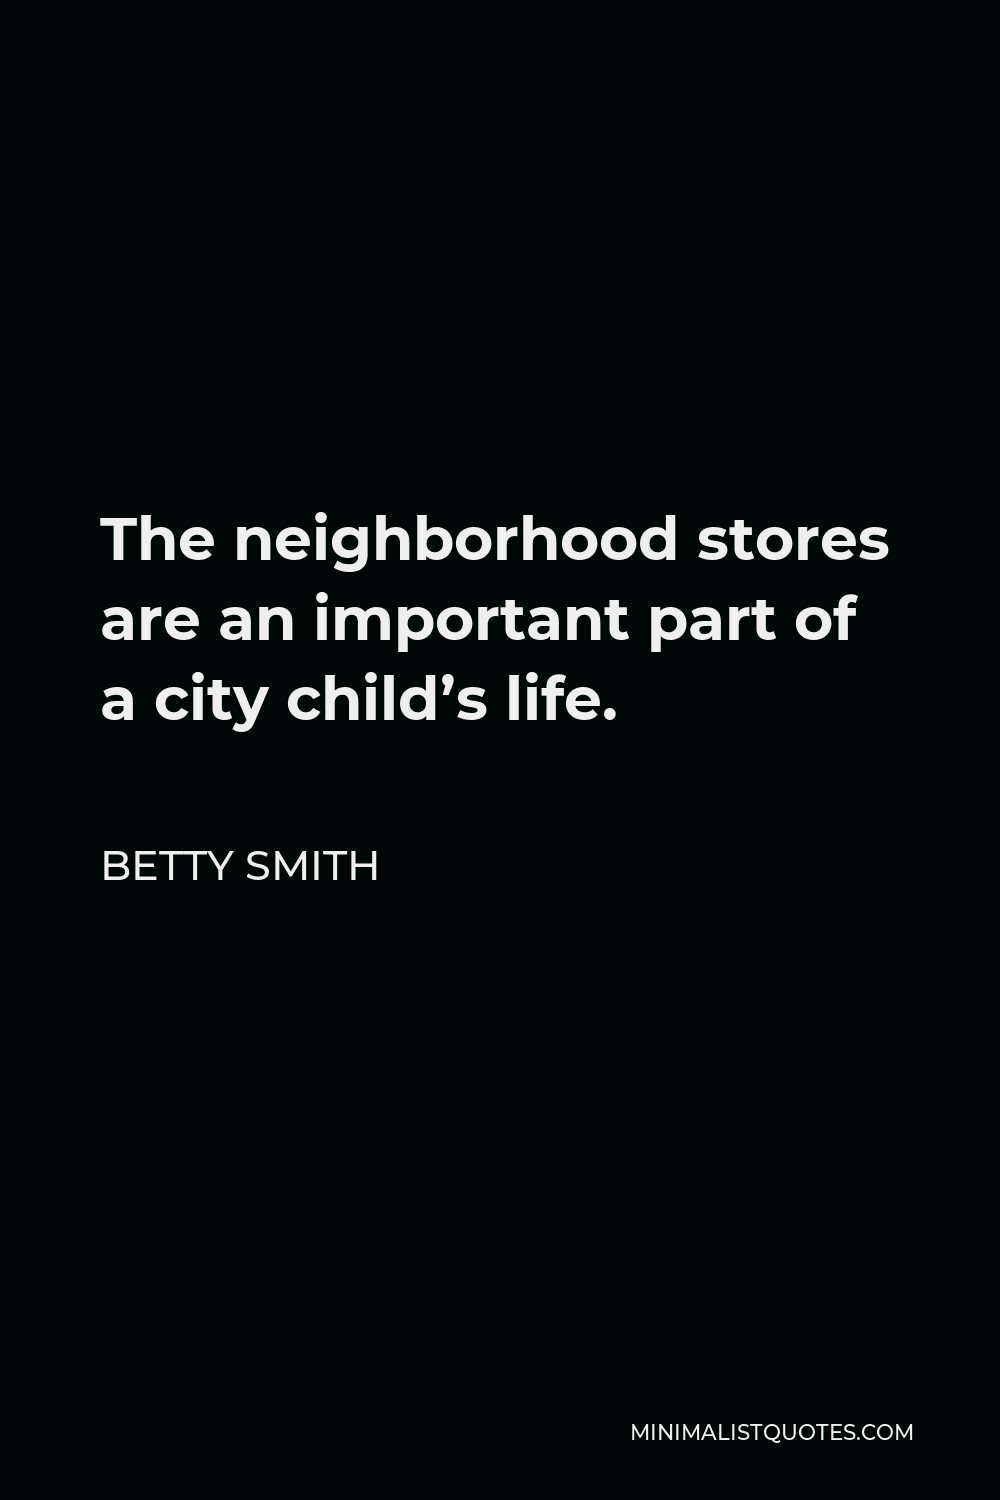 Betty Smith Quote - The neighborhood stores are an important part of a city child’s life.